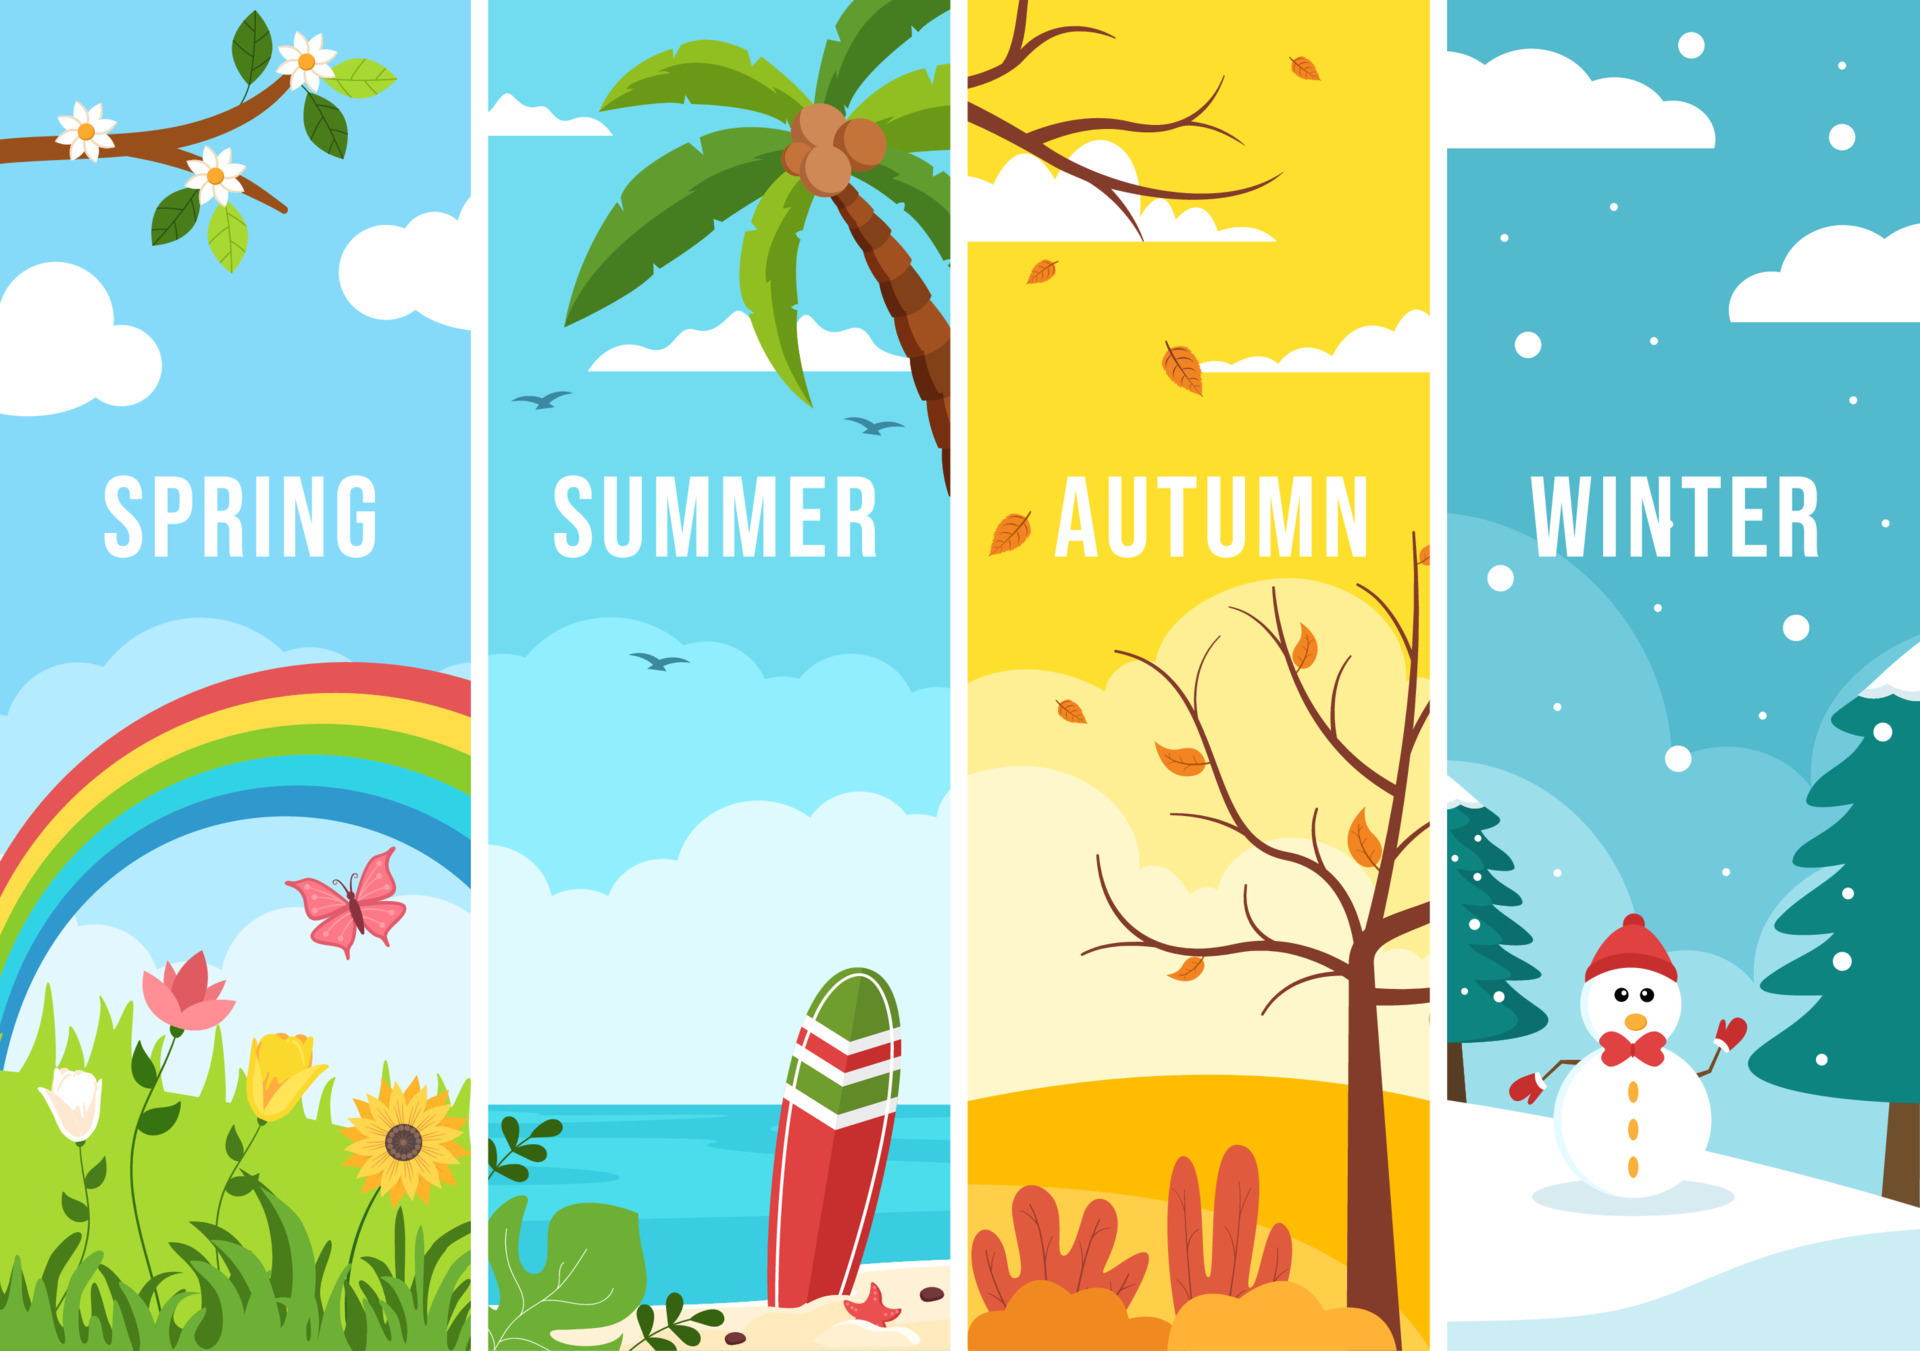 Scenery of the Four Seasons of Nature with Landscape Spring